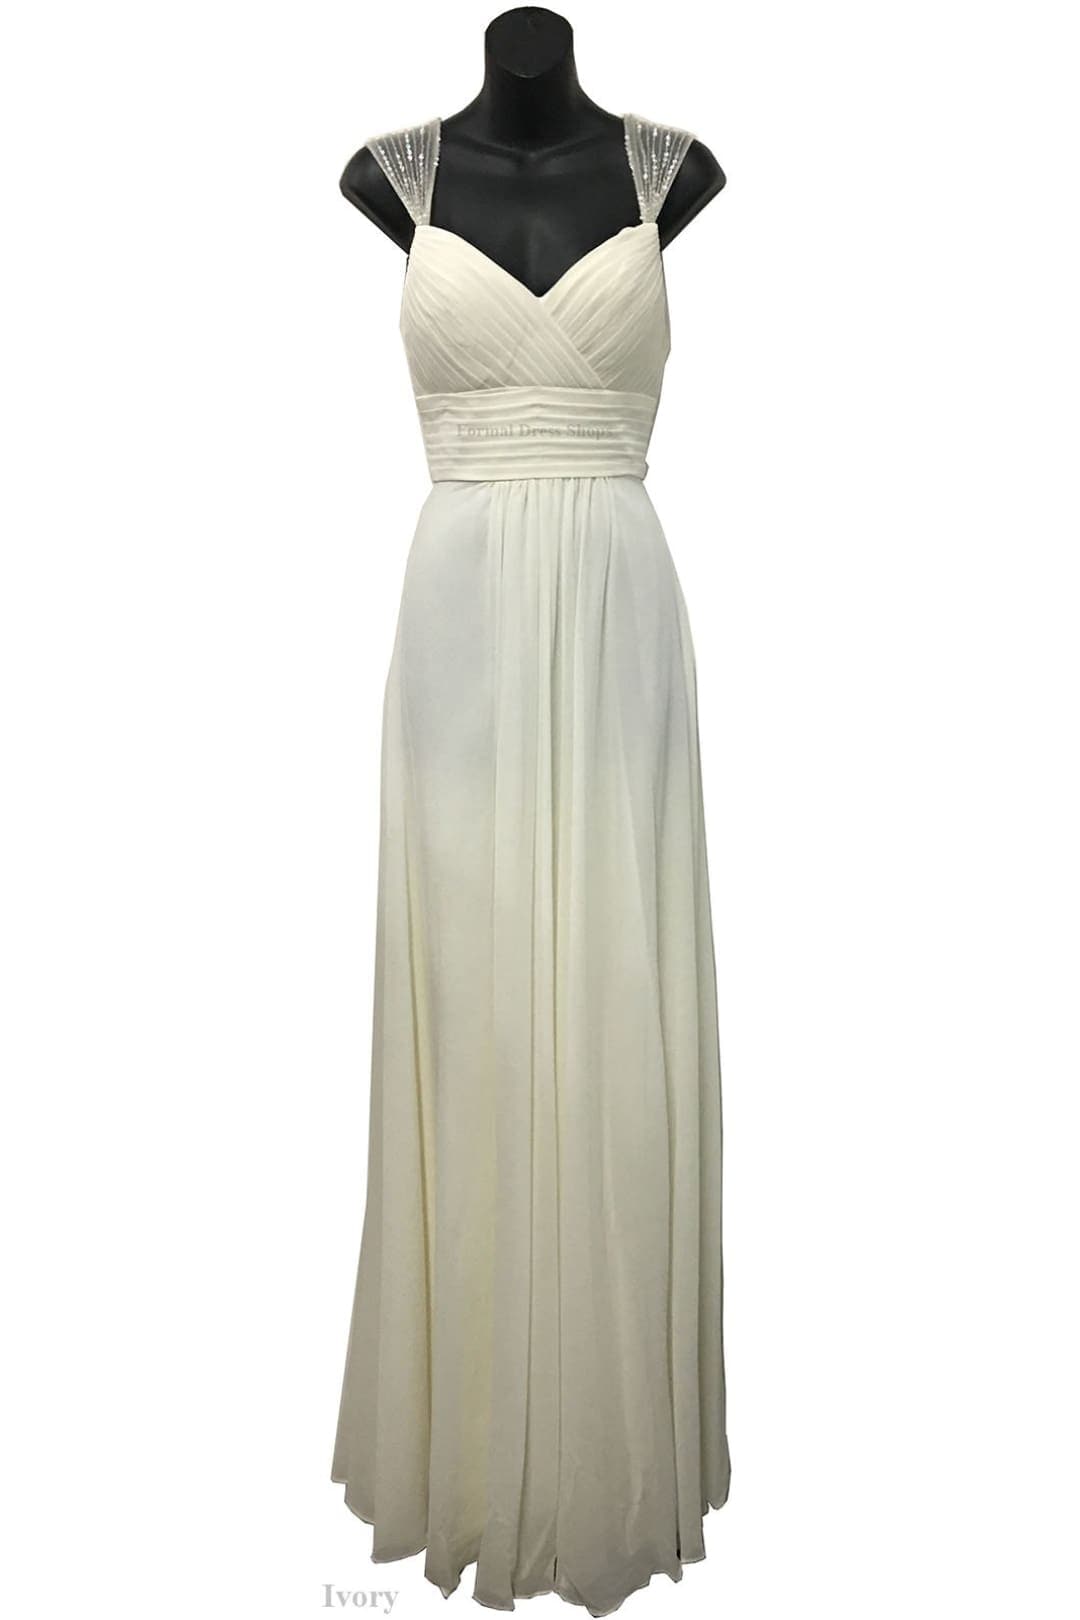 Classy Long Bridal Evening Gown - IVORY / 4